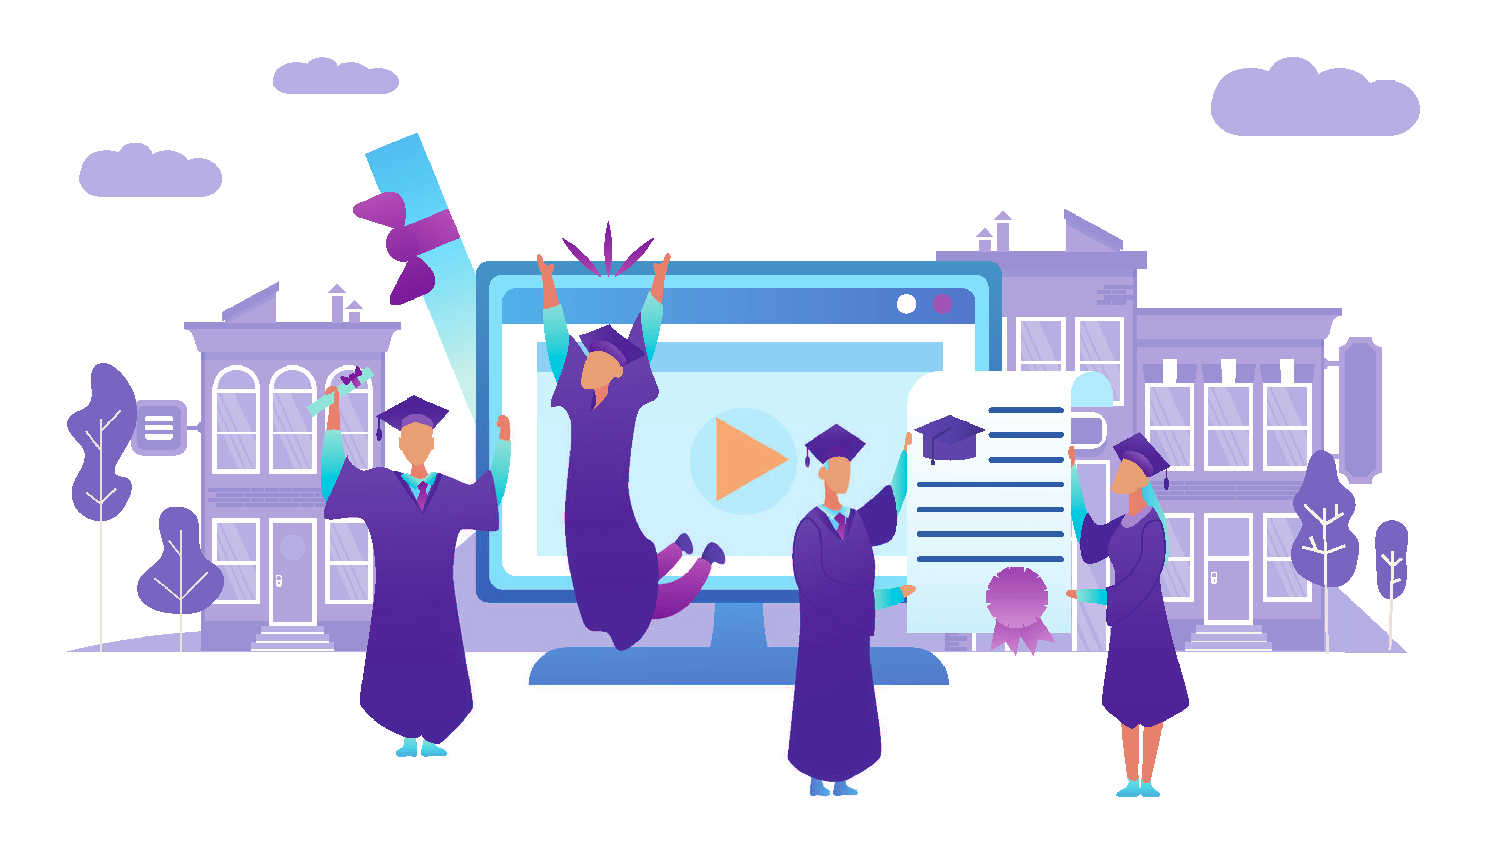 Vector image of students celebrating  graduation, depicted with joyful expressions.